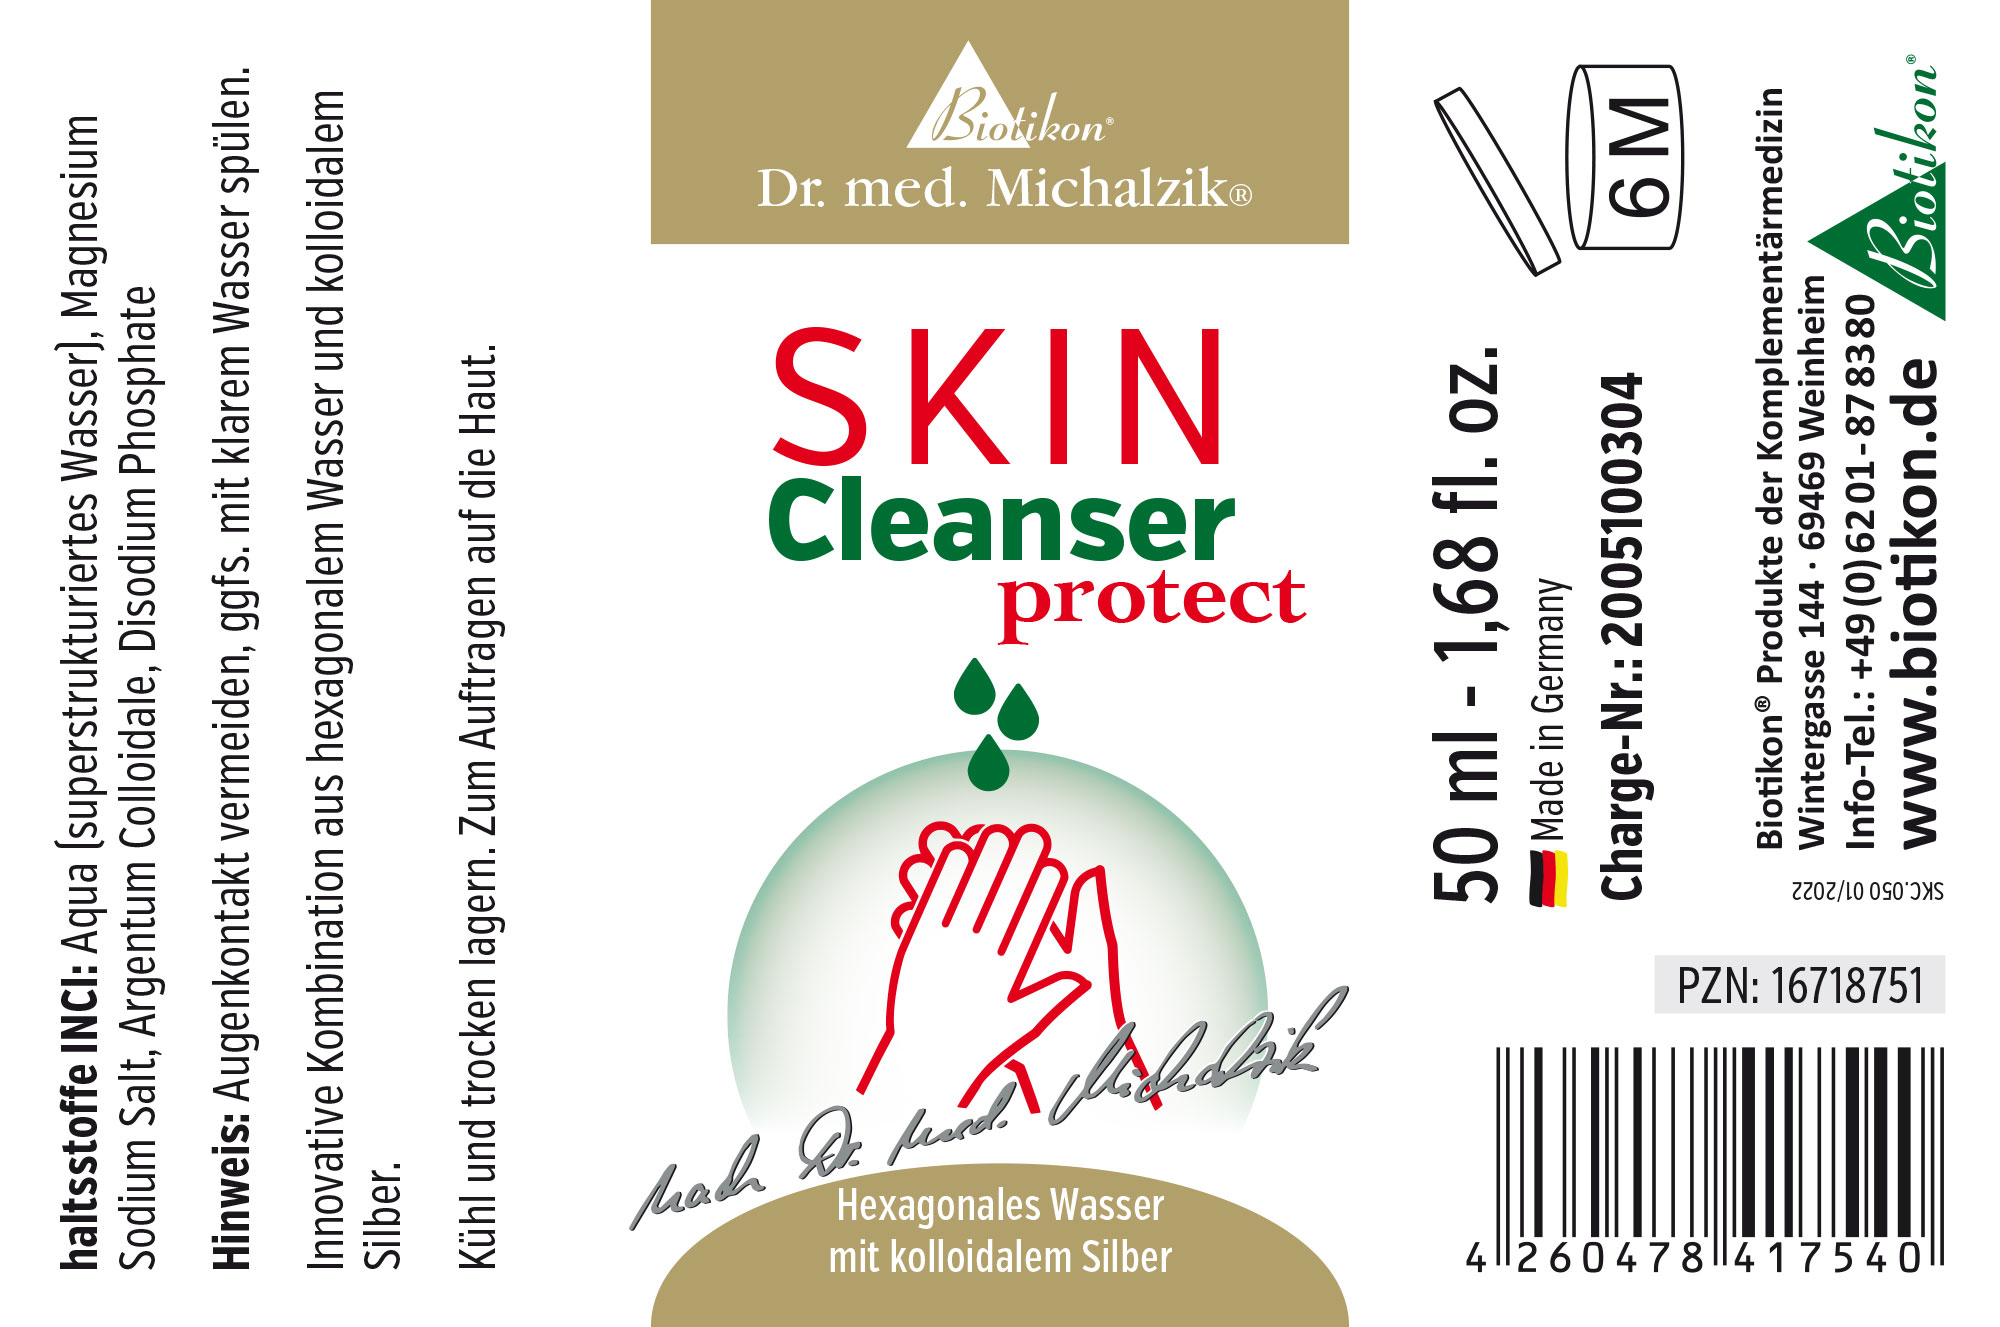 Skin Cleanser protect